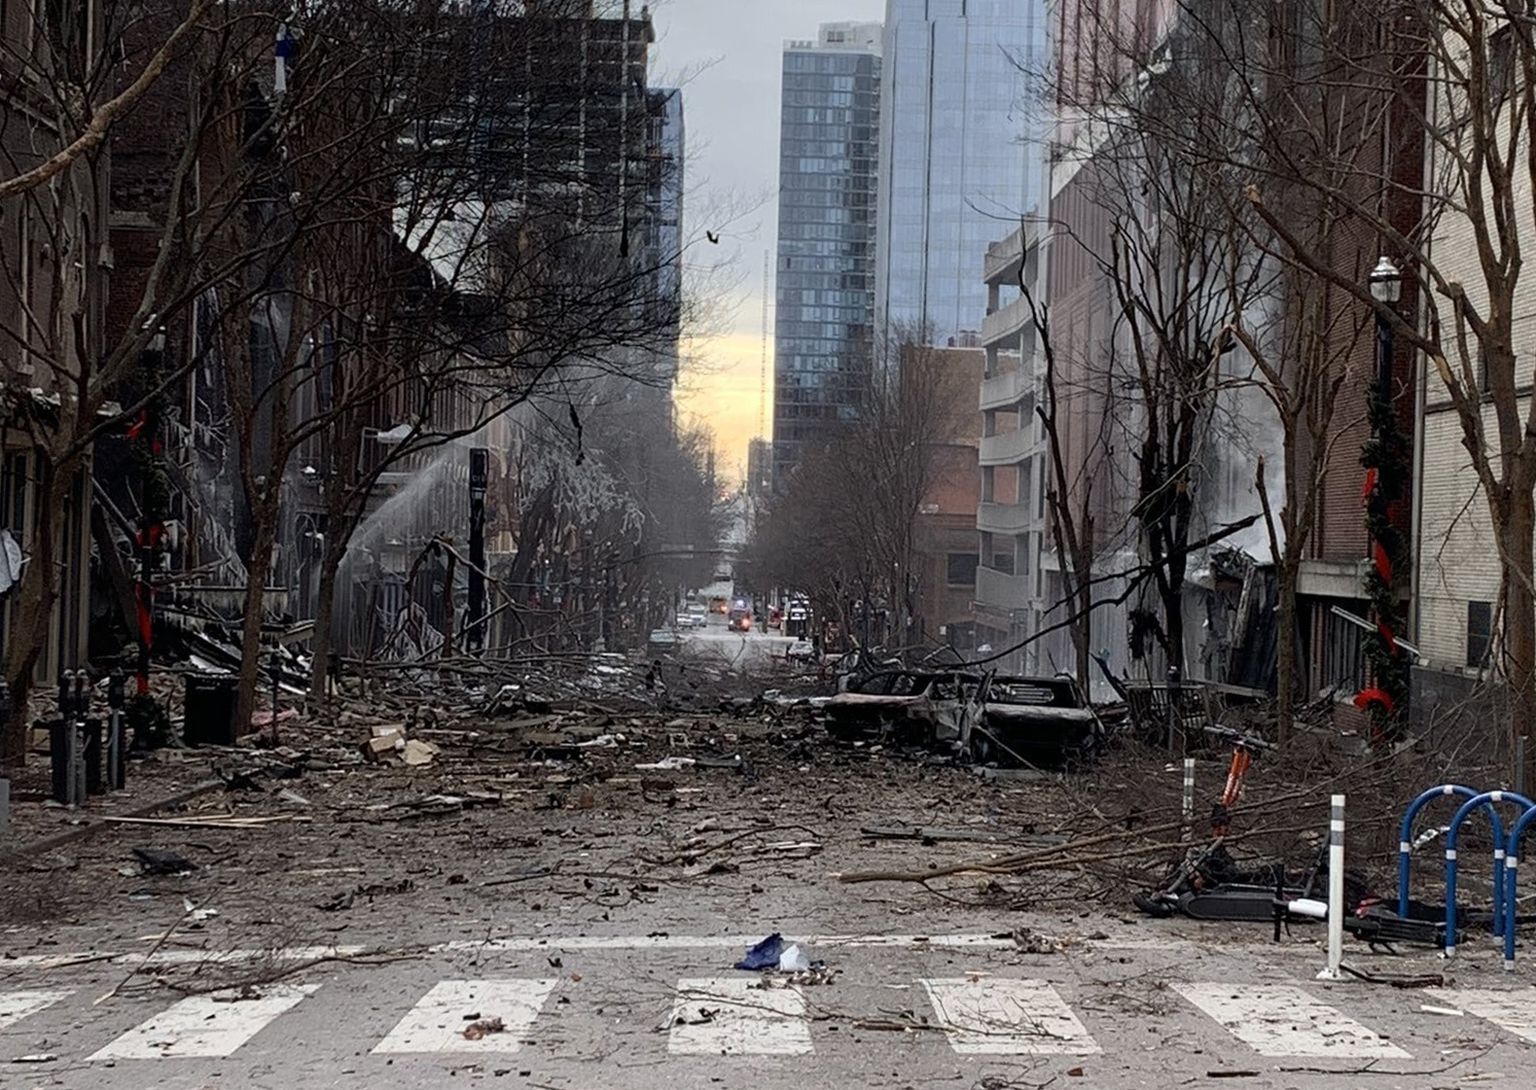 TOPSHOT - In this photo from the Twitter page of the Metro Nashville Police Department, damage is seen on a street after an explosion in Nashville, Tennessee on December 25, 2020. - Officials believe that a Christmas morning explosion in downtown Nashville was an intentional act, according to a Metro Nashville Police spokesman Don Aaron. (Photo by Handout / Metro Nashville Police Department / AFP) / RESTRICTED TO EDITORIAL USE - MANDATORY CREDIT "AFP PHOTO / HO/ Twitter/ Metro Nashville Police Department" - NO MARKETING - NO ADVERTISING CAMPAIGNS - DISTRIBUTED AS A SERVICE TO CLIENTS